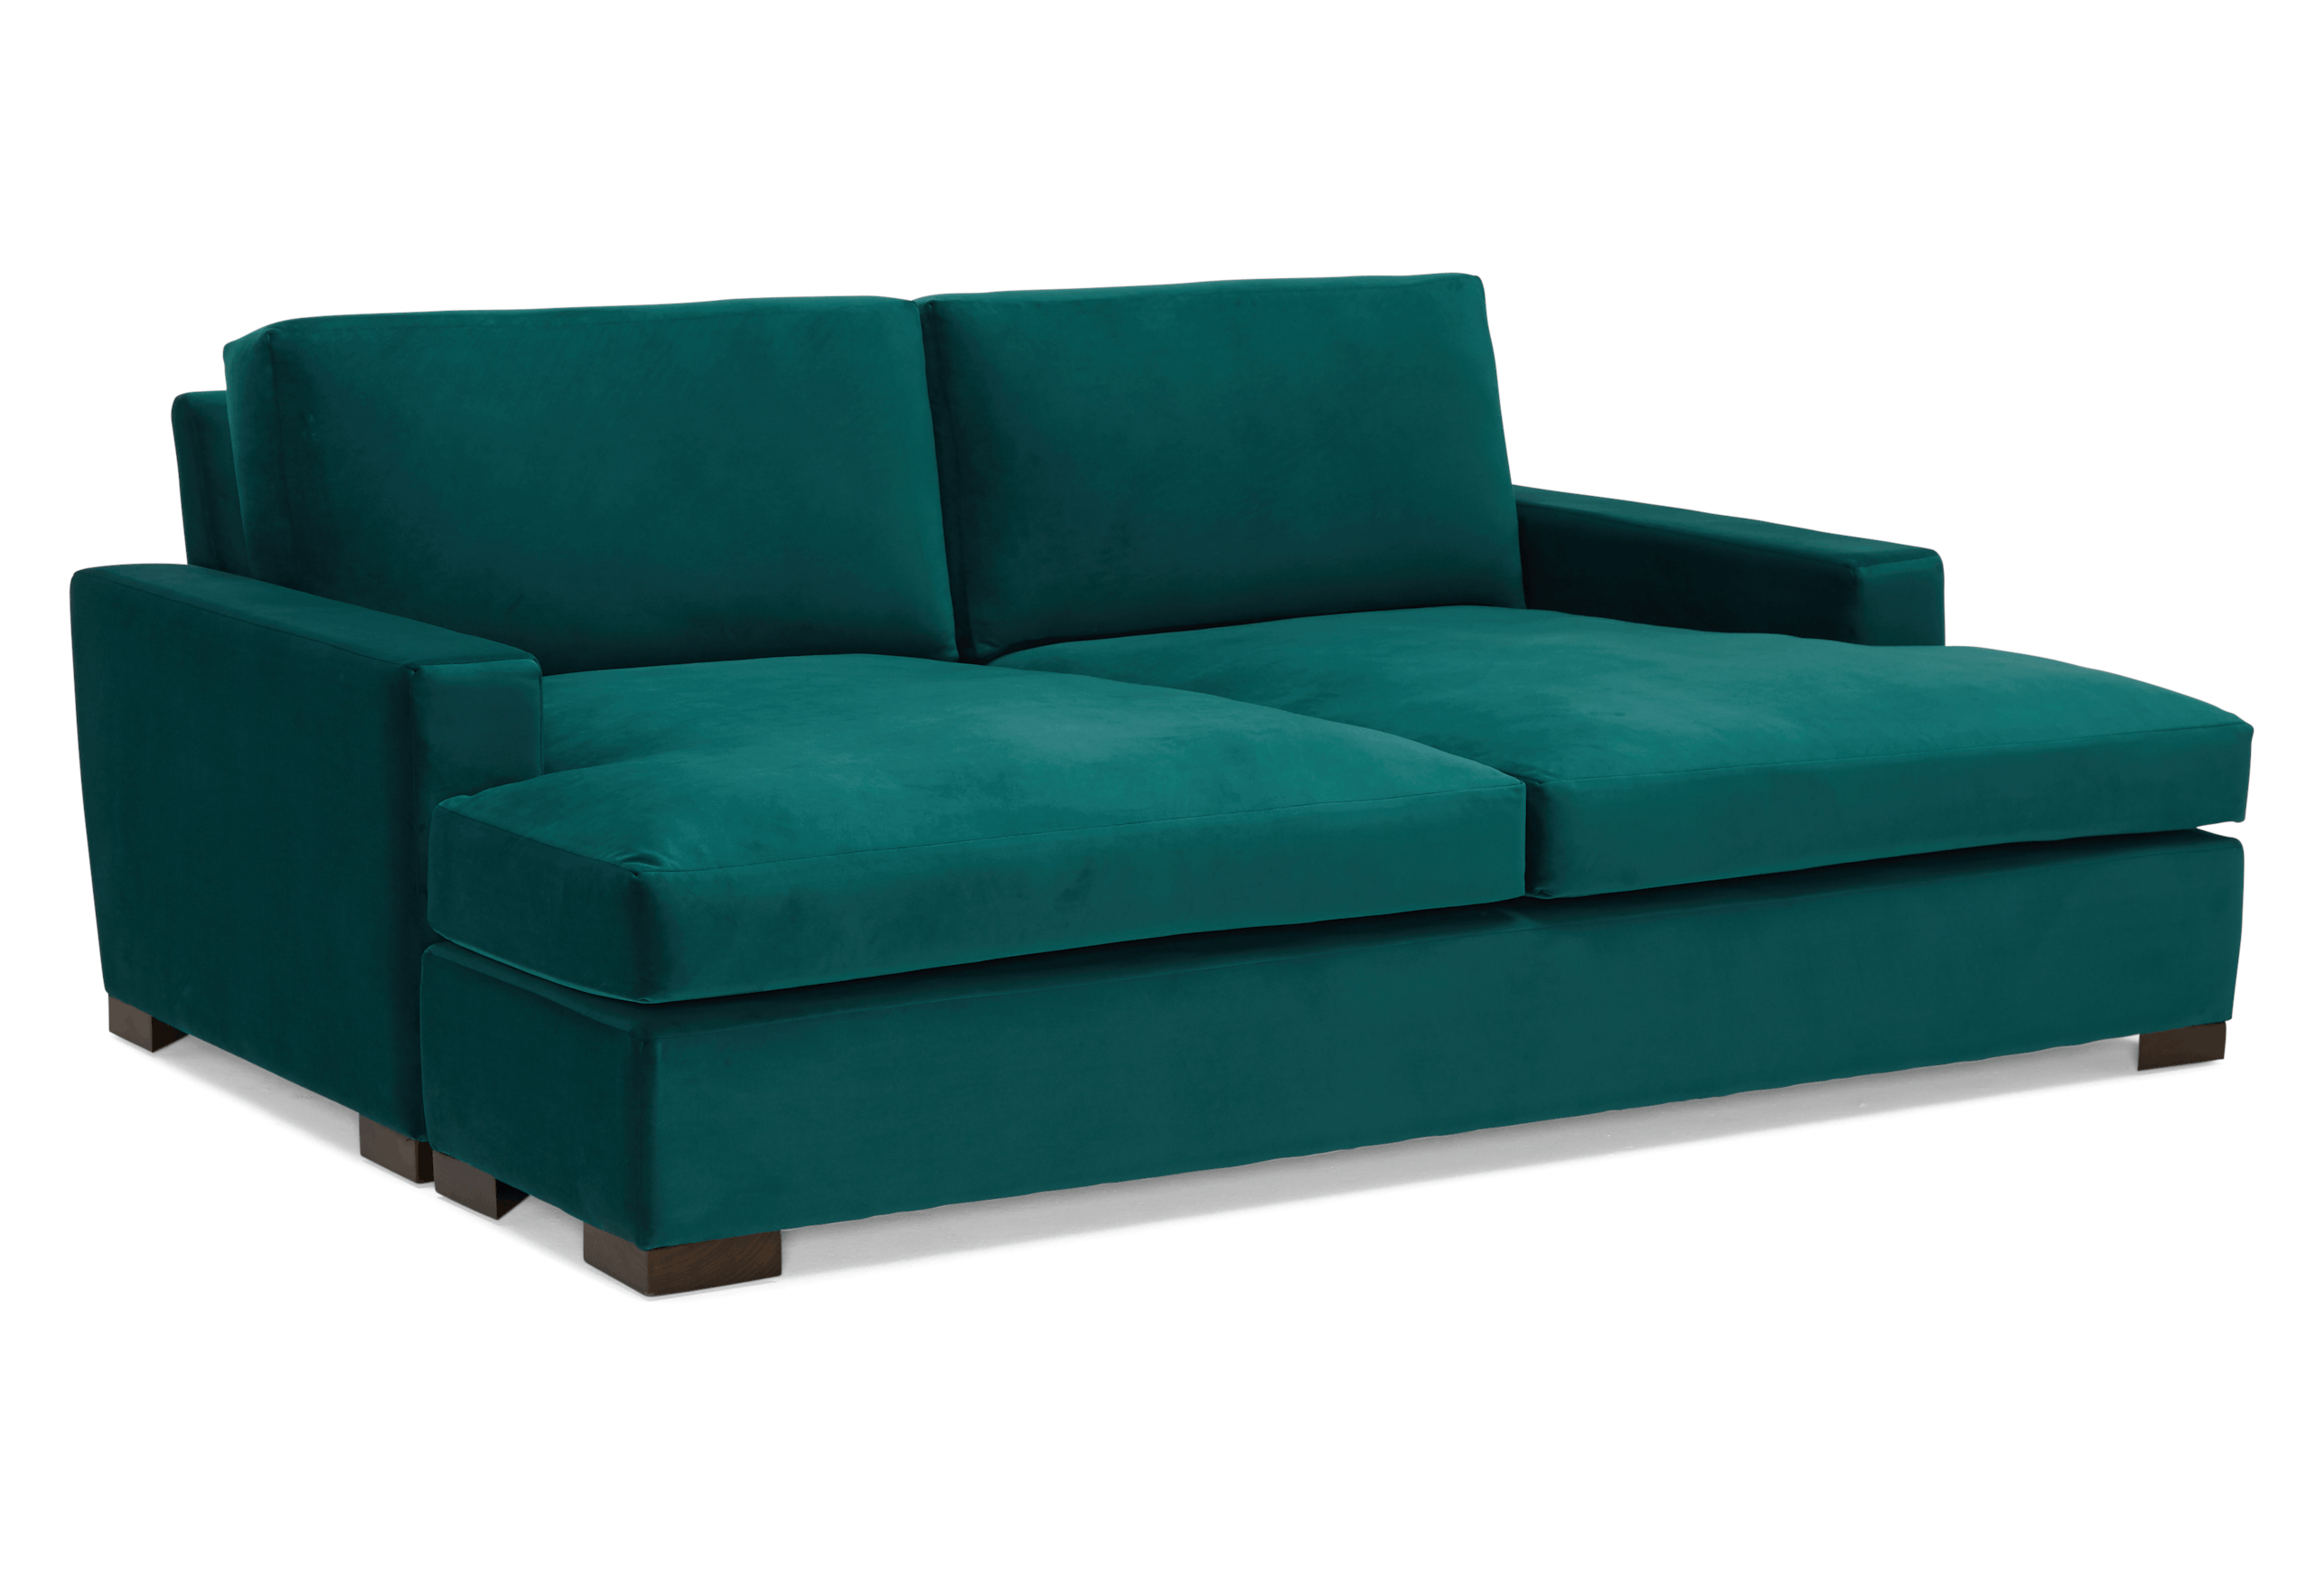 anton daybed royale peacock